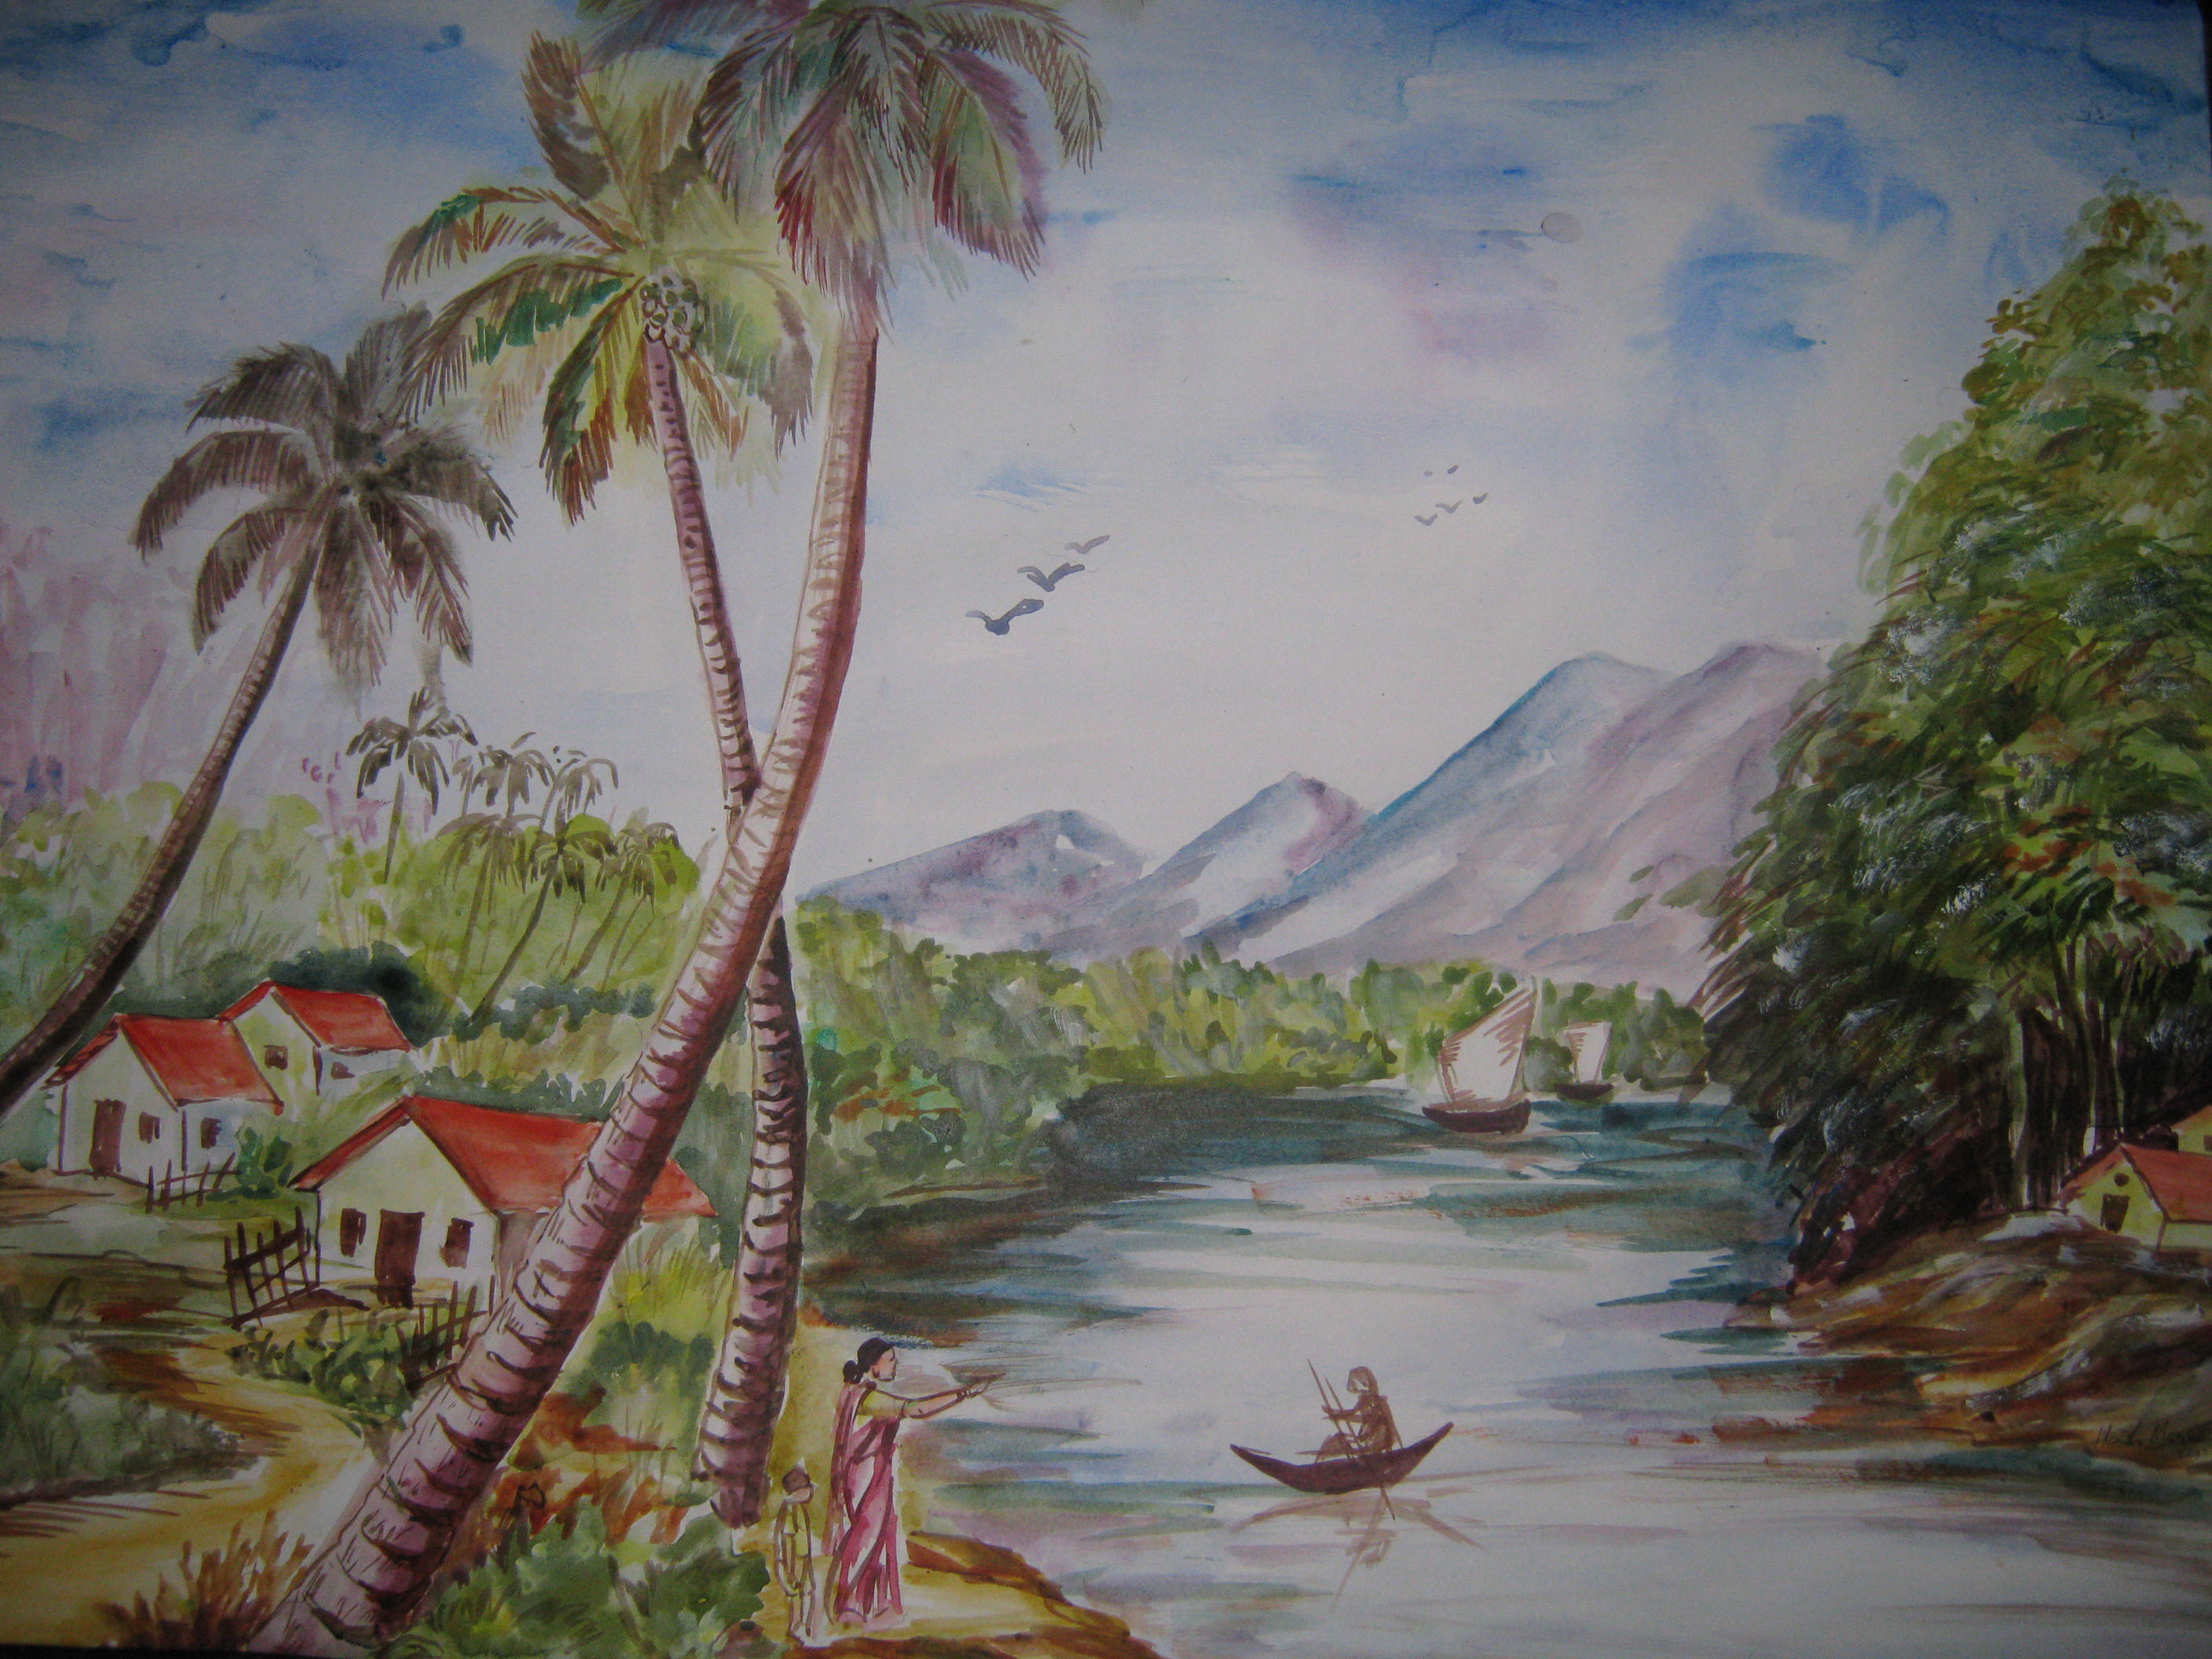 Drawing and Painting: Ankush best drawing-saigonsouth.com.vn